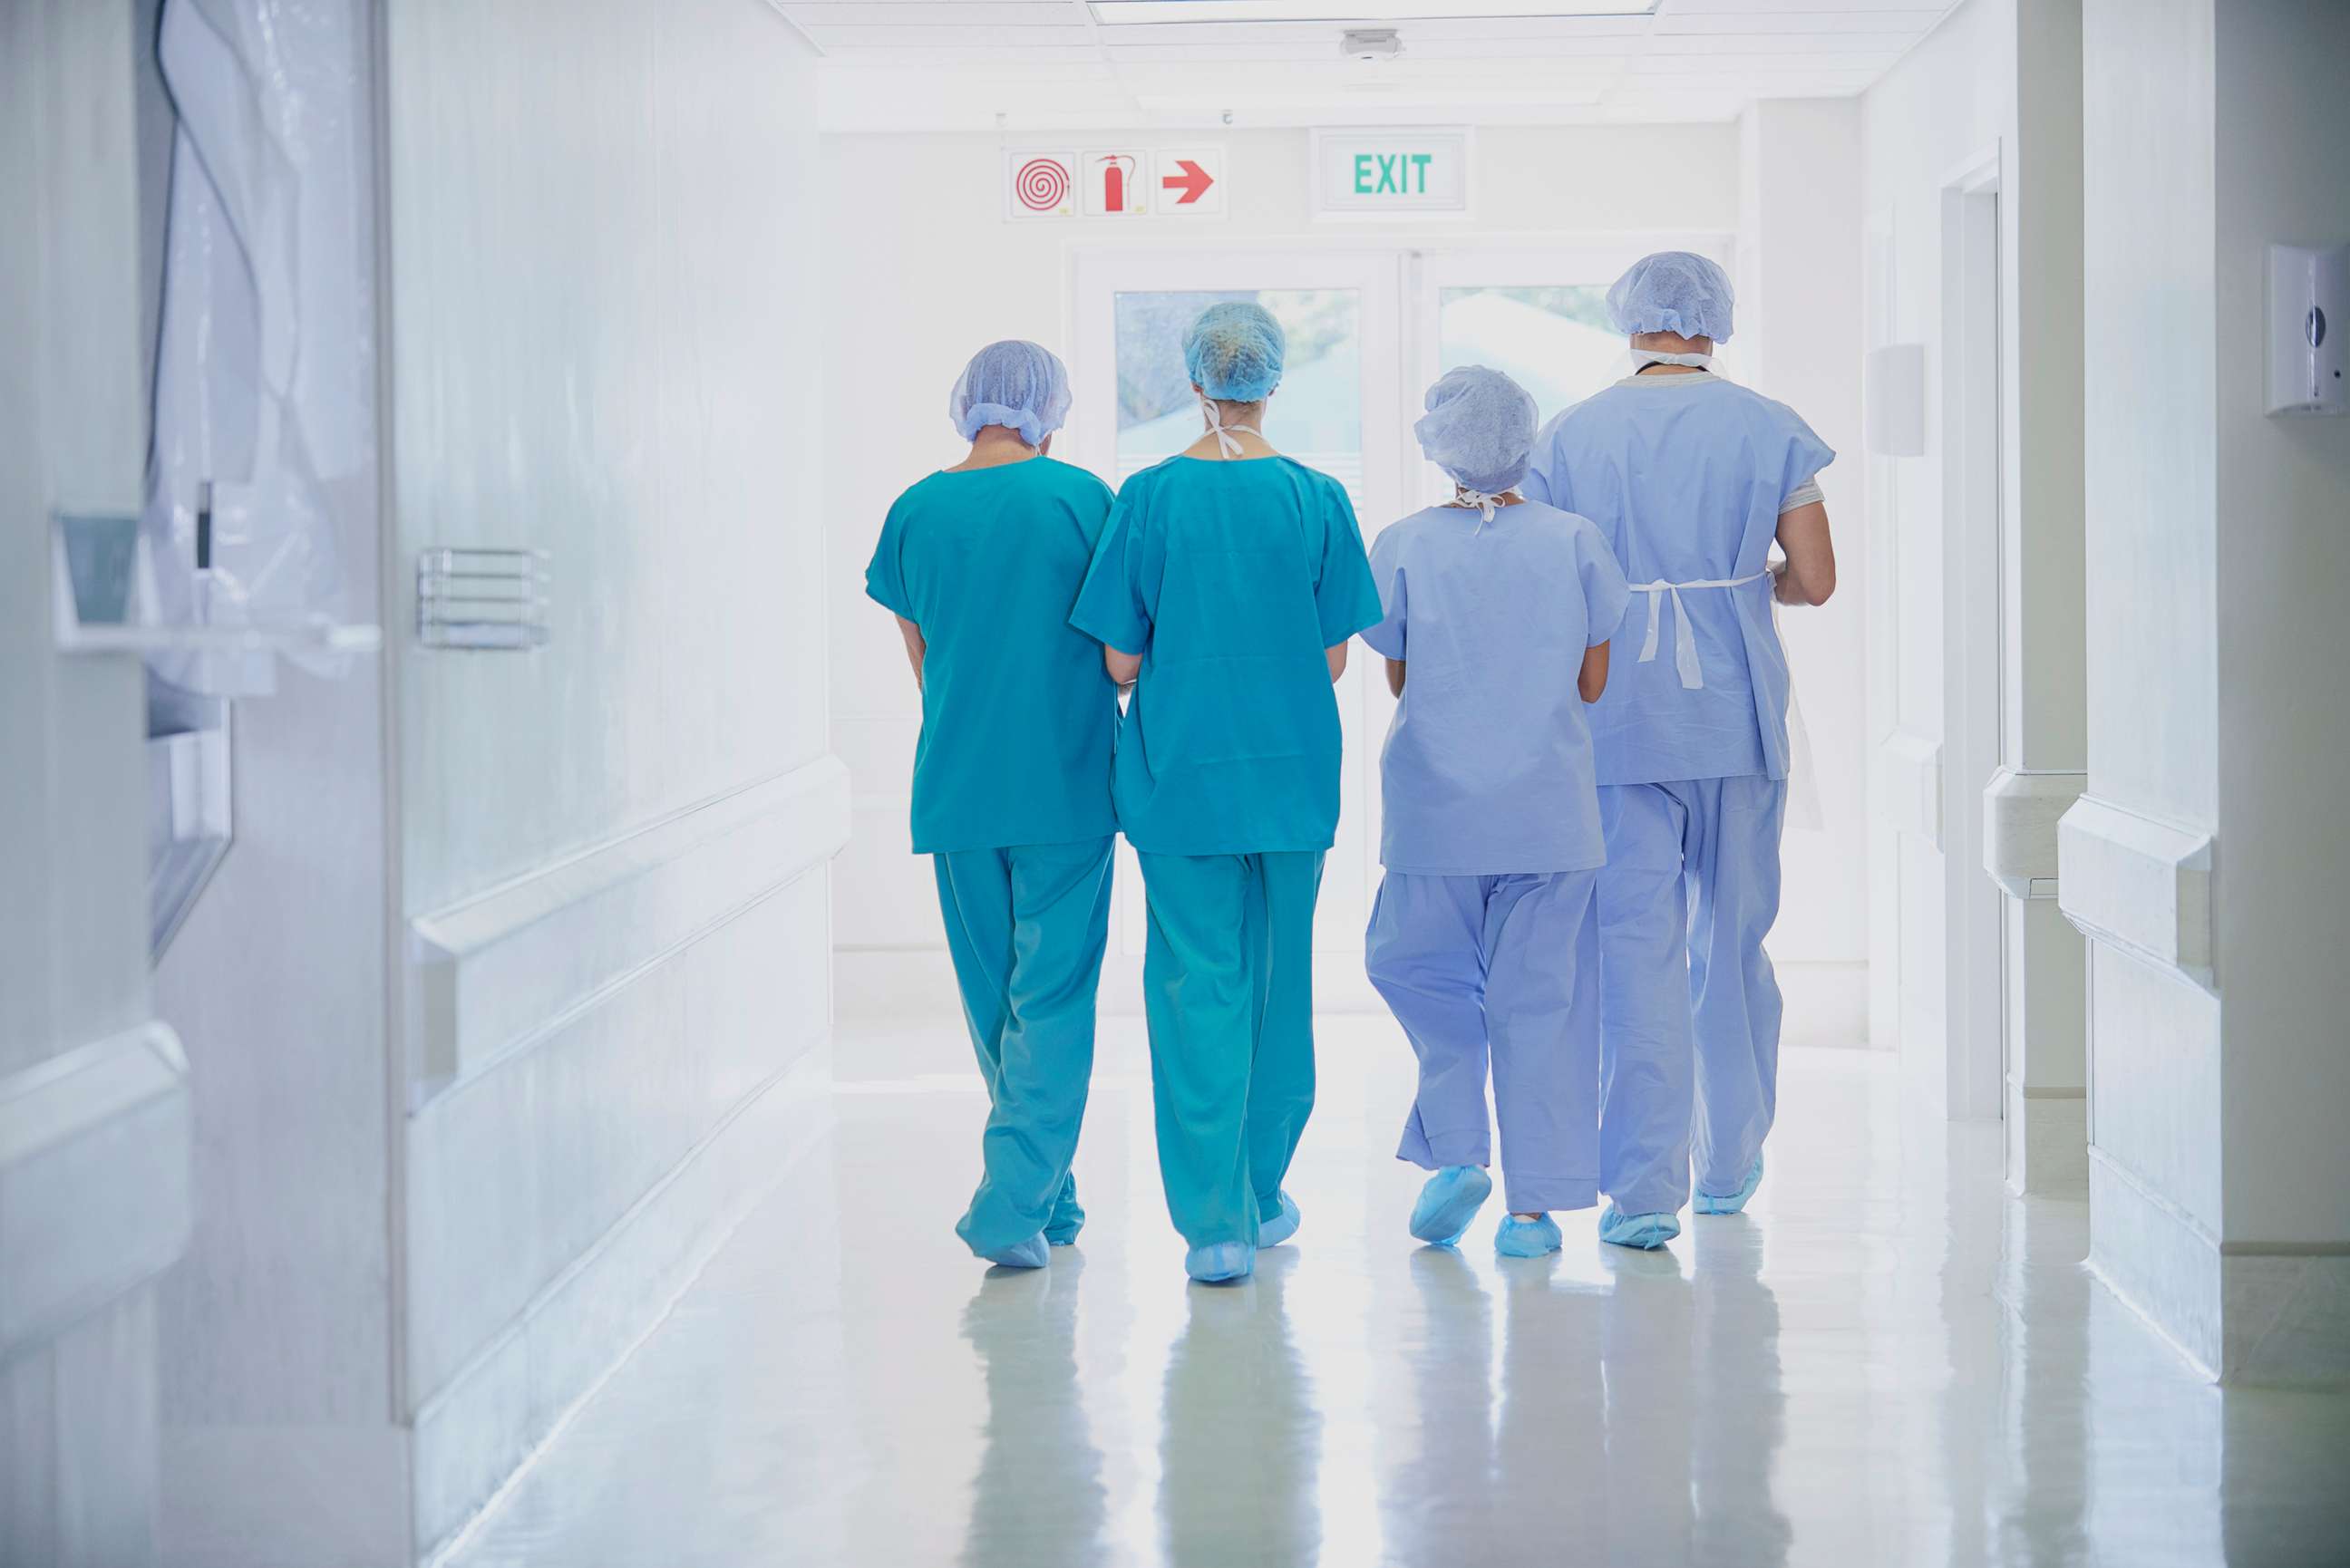 PHOTO: A rear view of four medical staff wearing scrubs is seen in this undated stock photo.